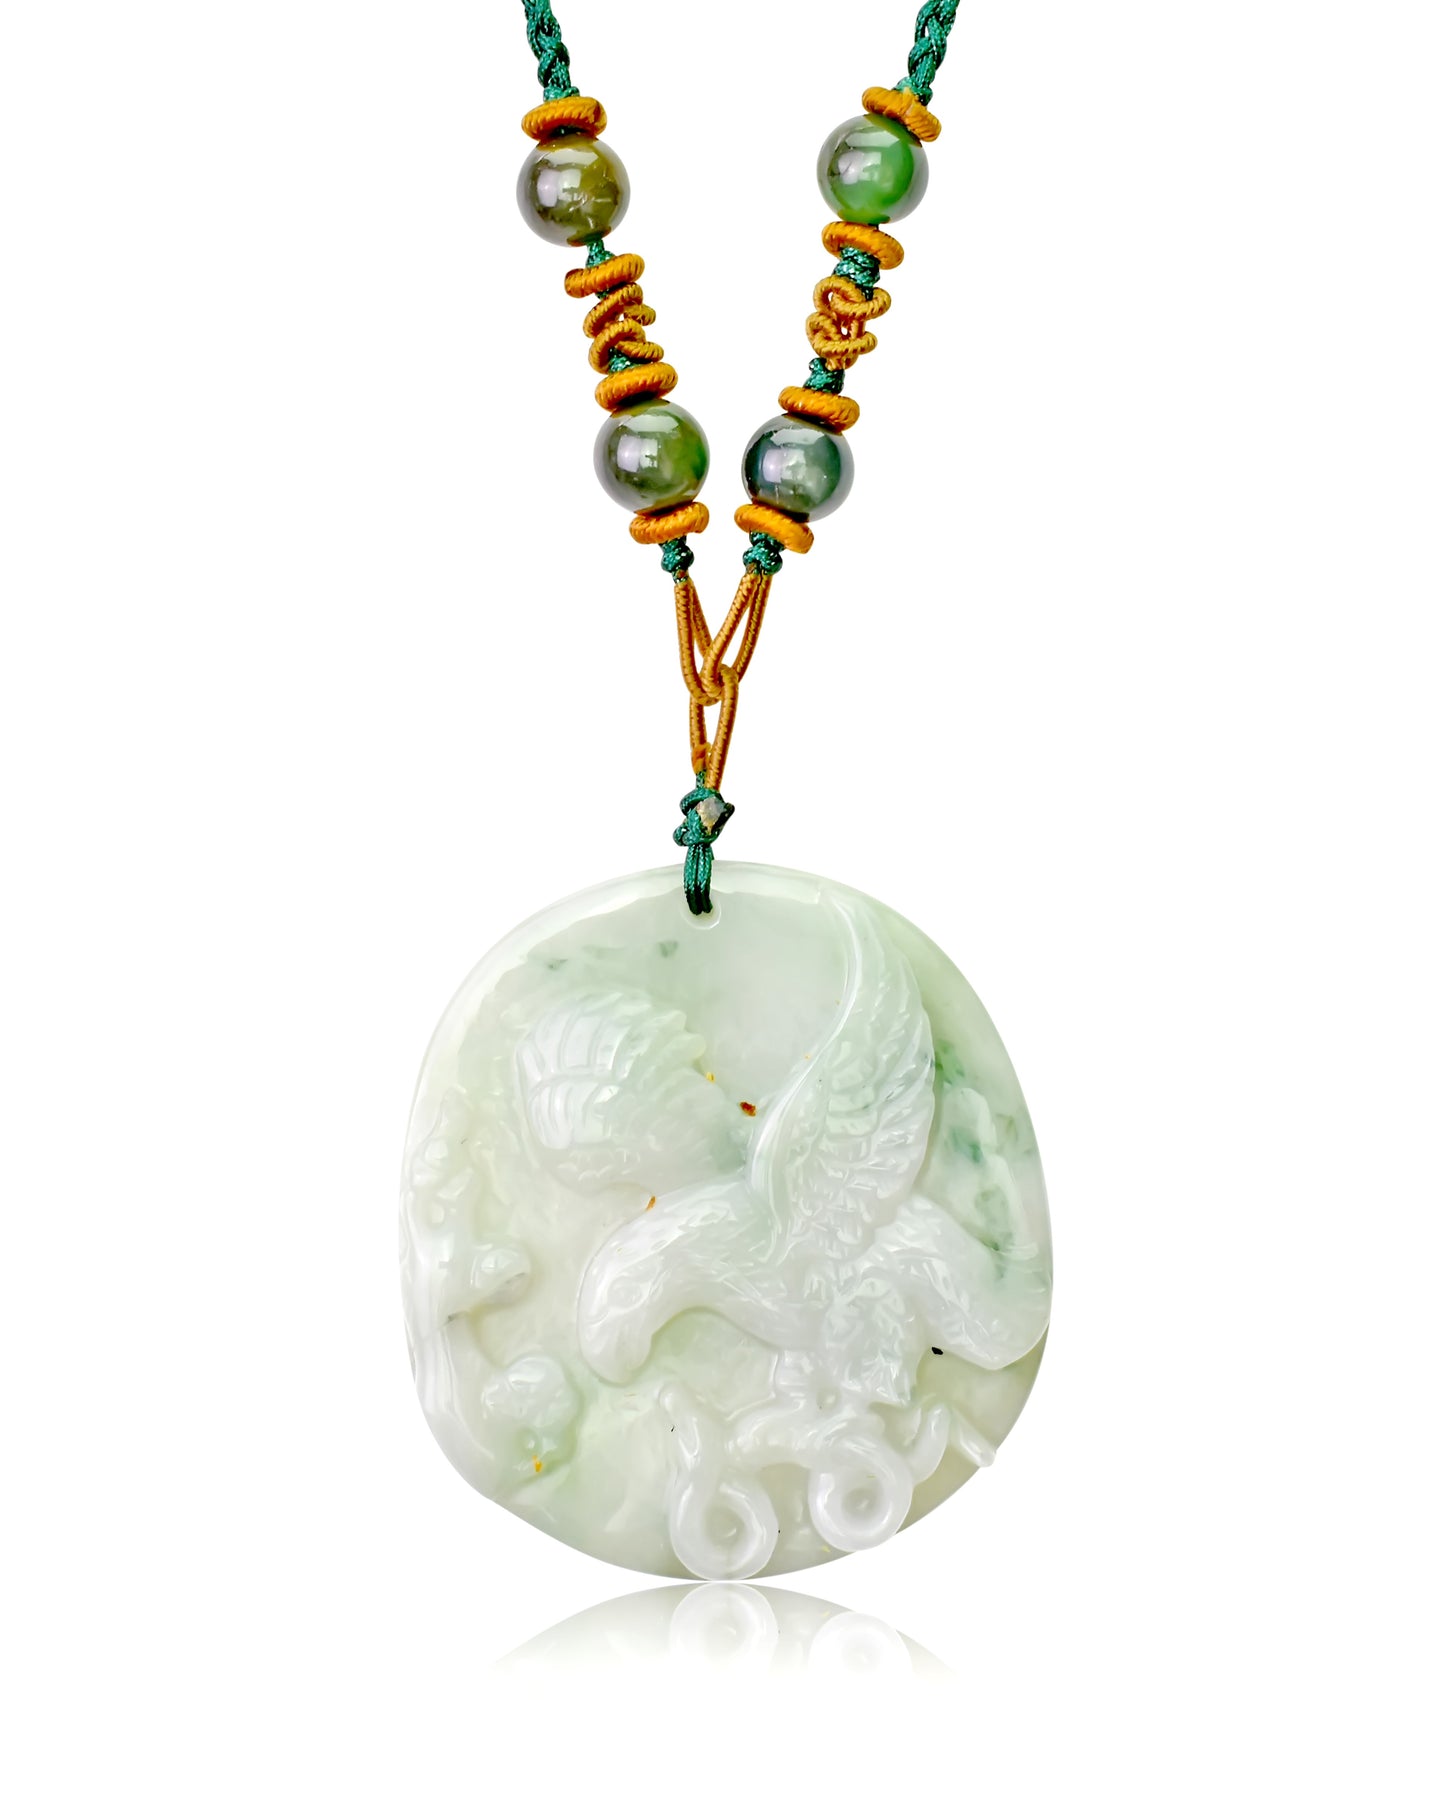 Feel Special in a Spectacular Eagle and Snake Jade Necklace